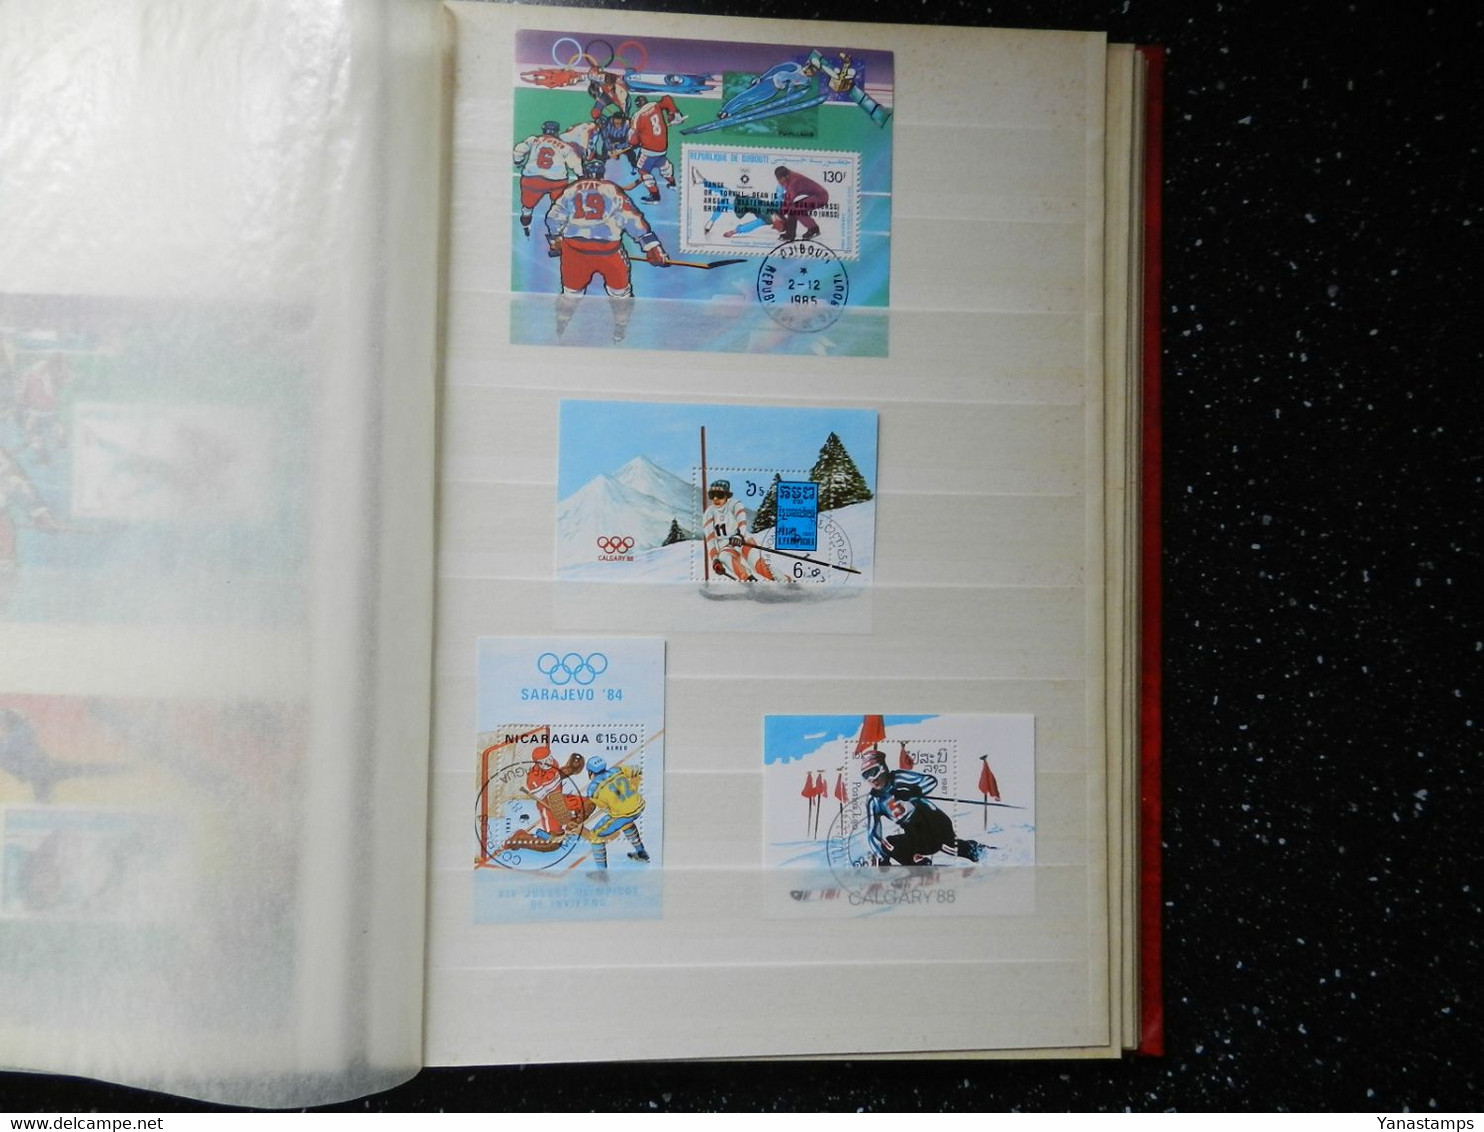 Wintersports/Olympics : stockbook full of stamps with 120+ blocks/sheetlets, CHEAP !!!